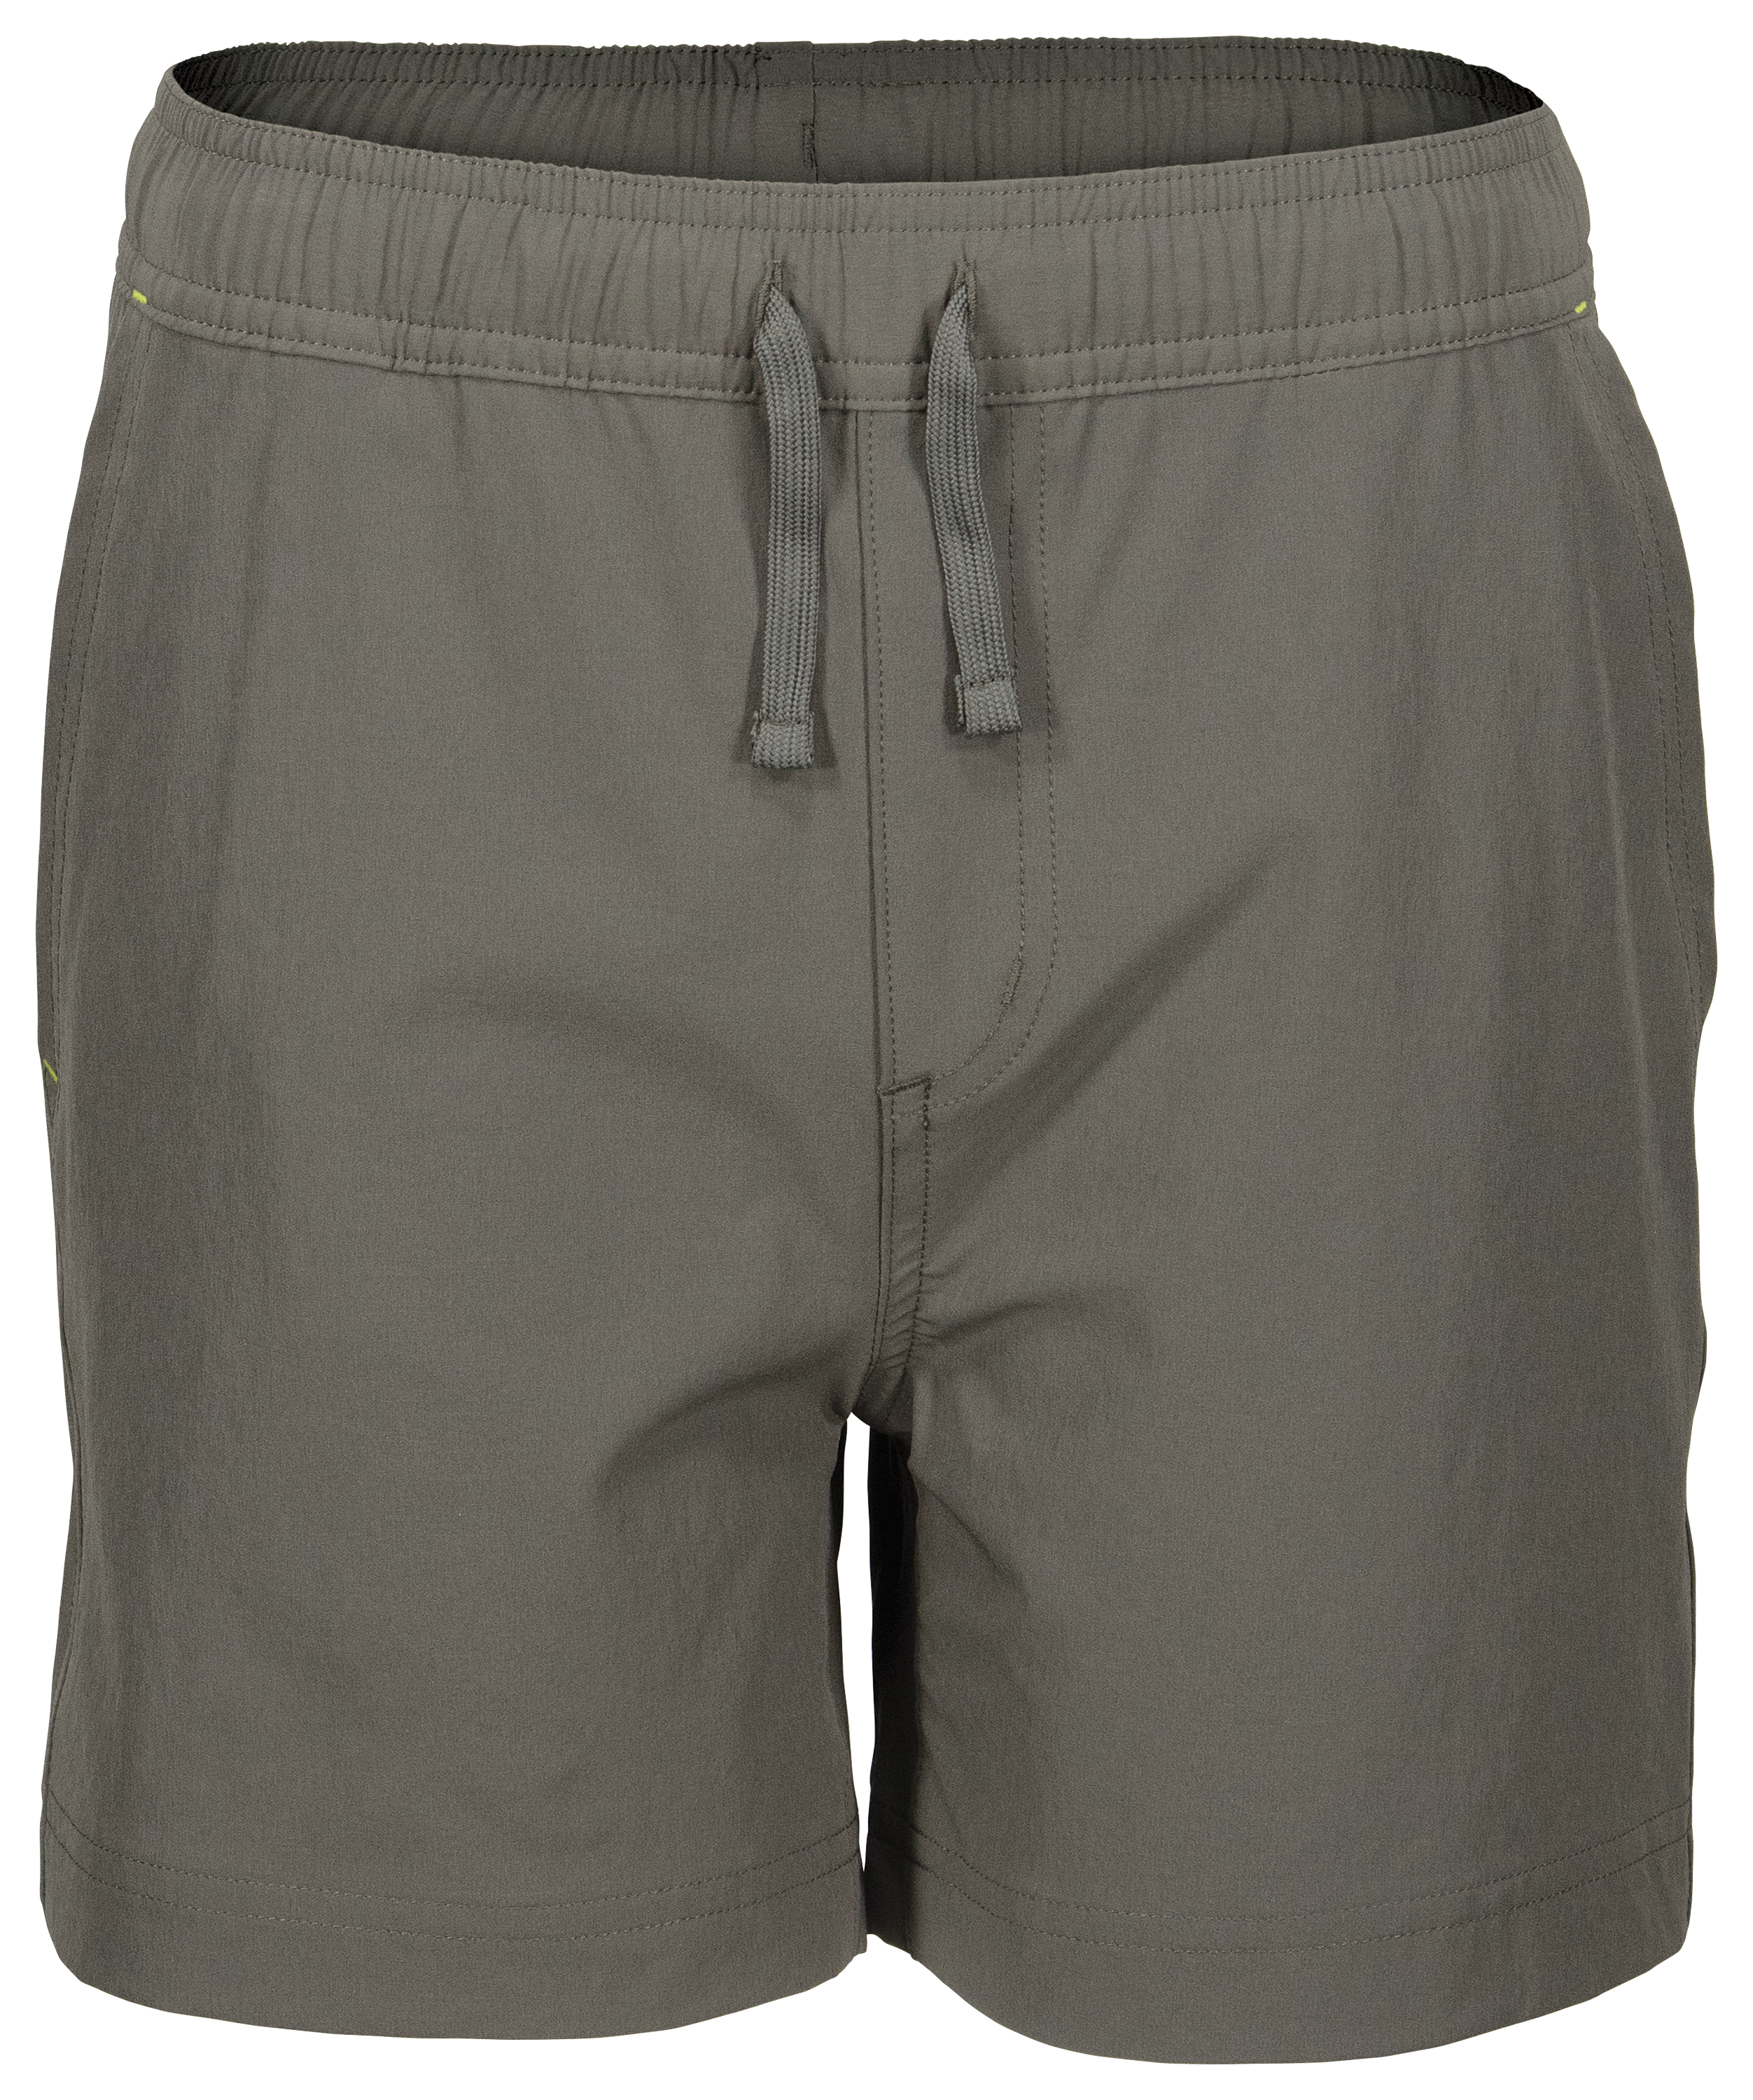 World Wide Sportsman Charter Pull-On Shorts for Boys - Gray - M